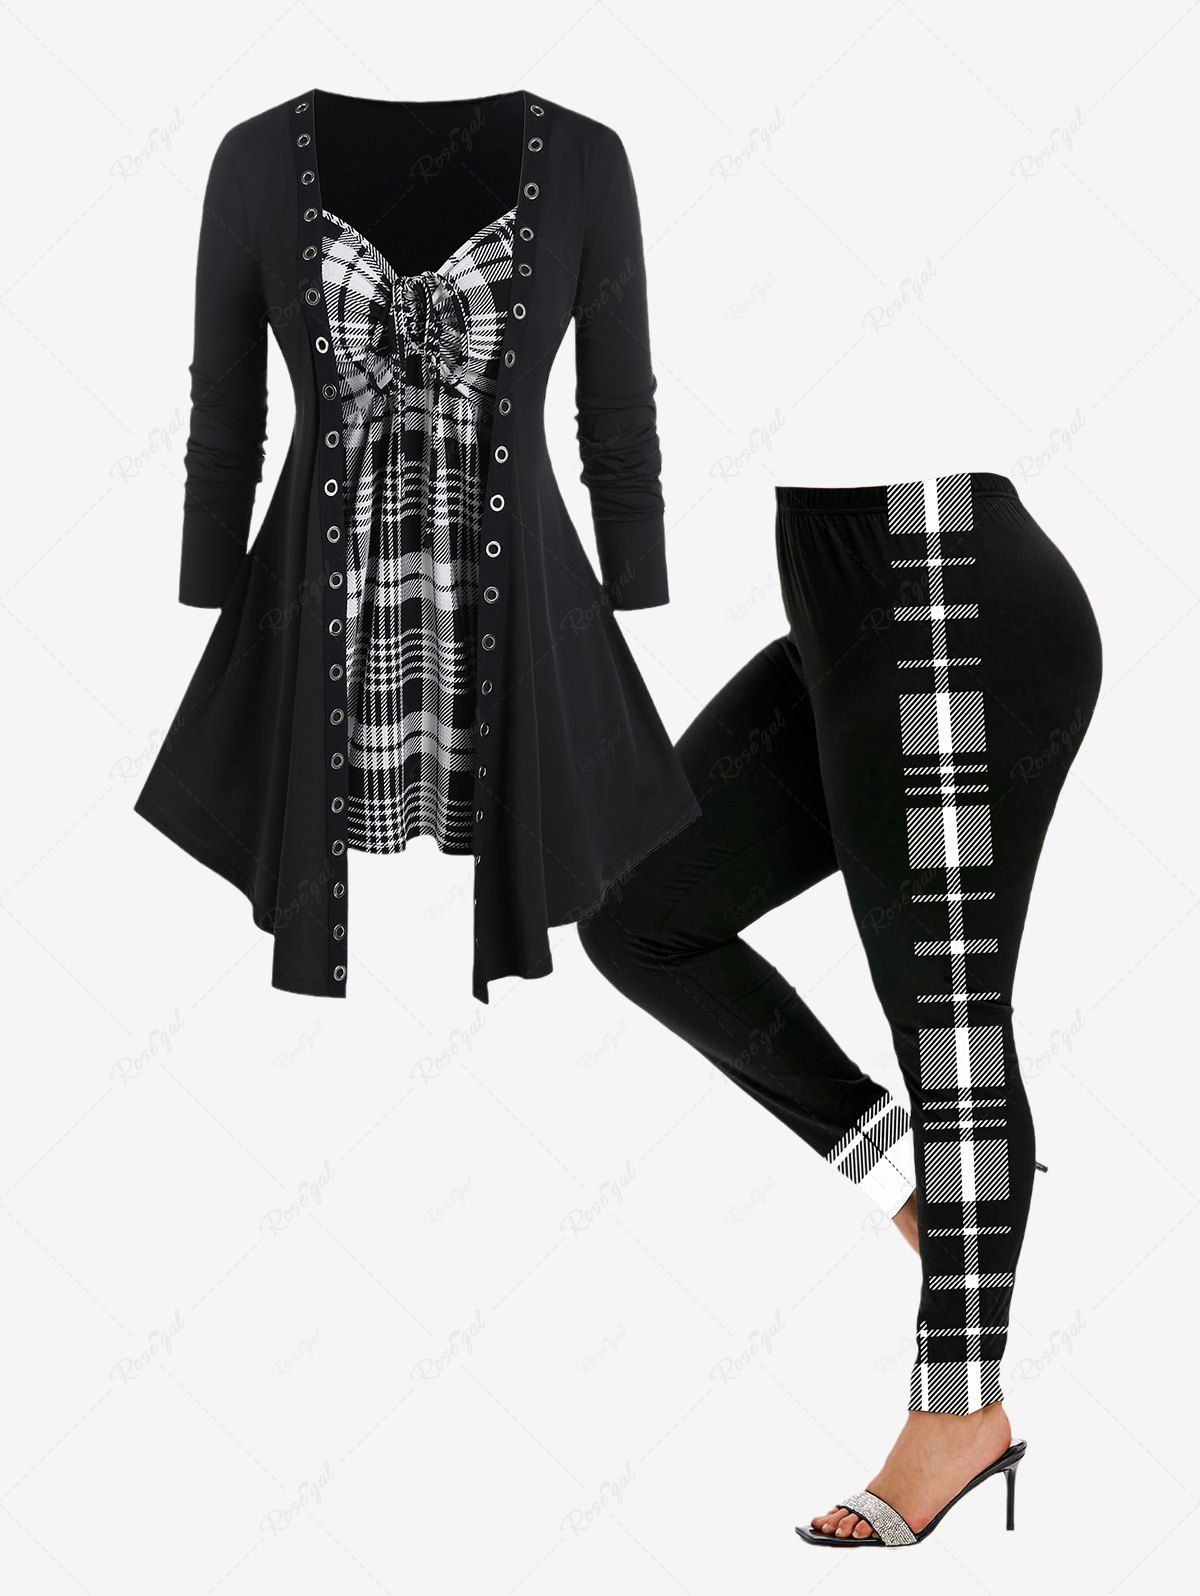 Chic Grommets Plaid Tee and Colorblock Leggings Plus Size Outfit  